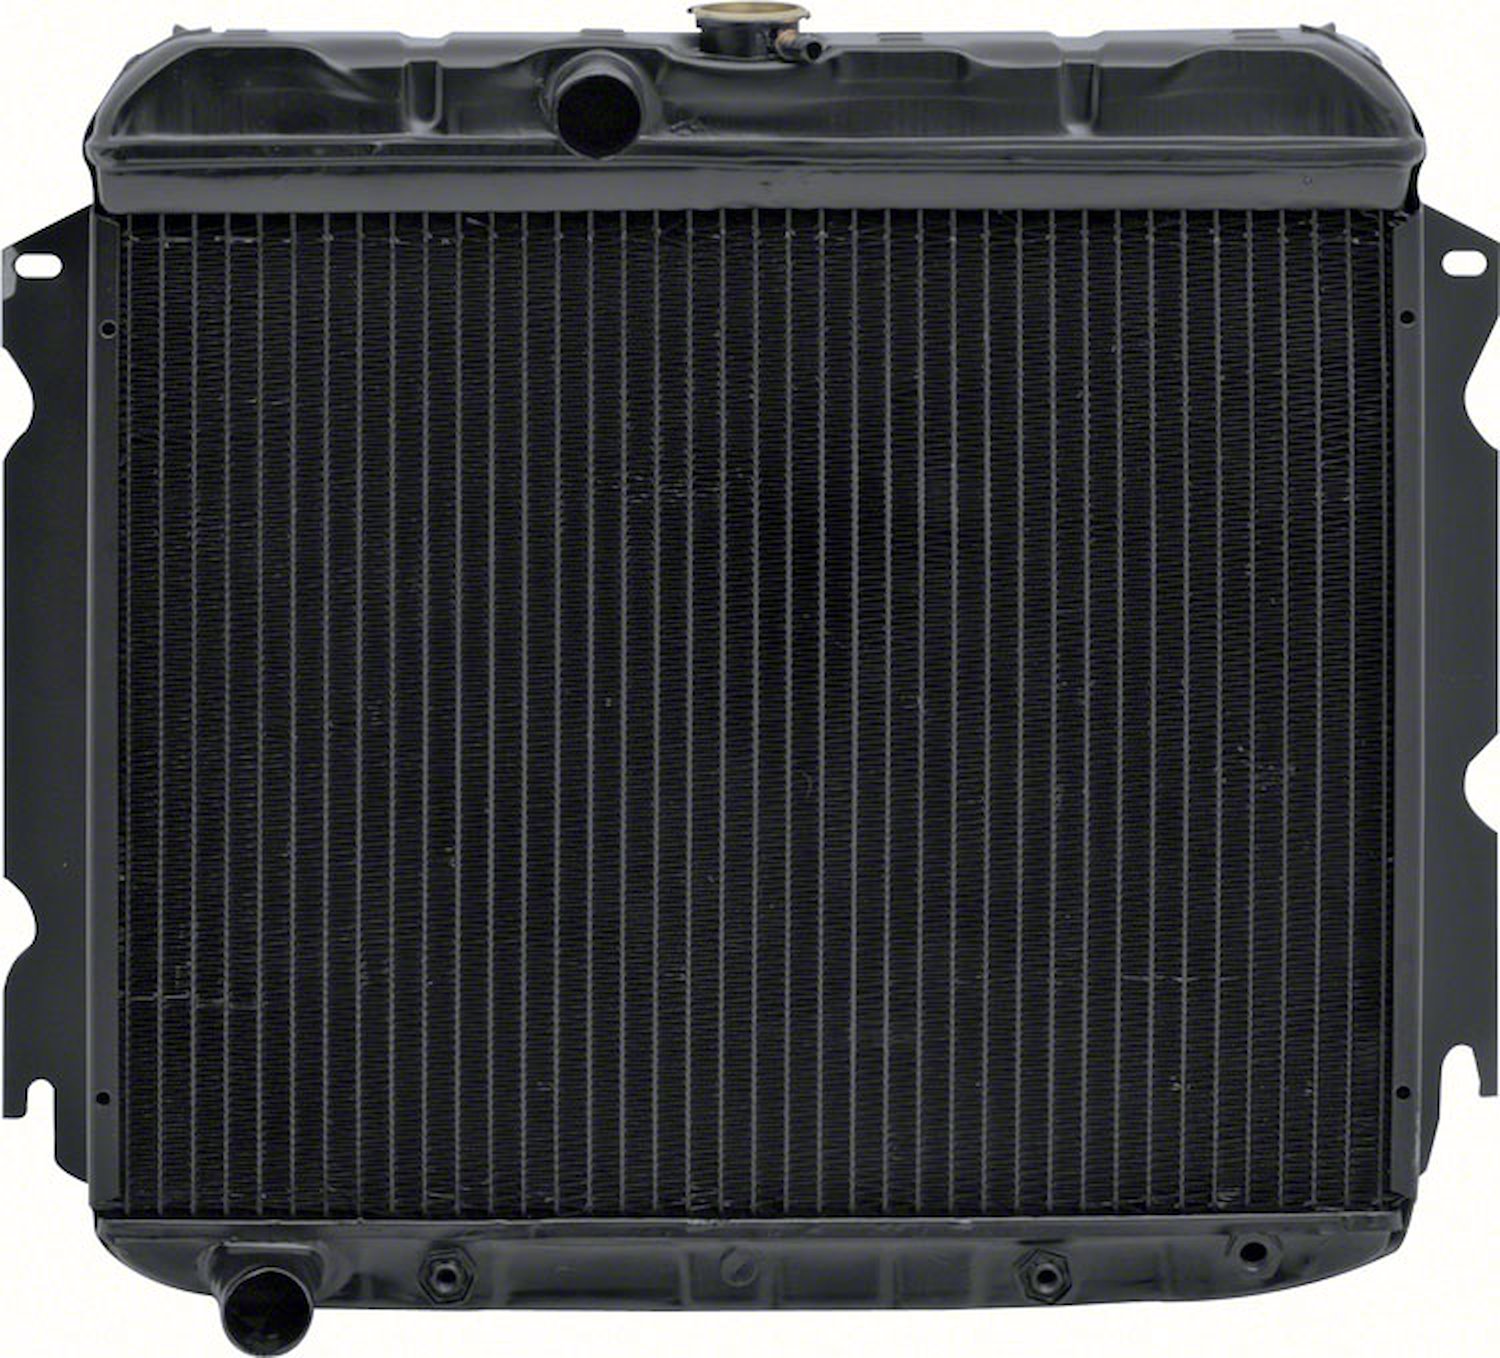 MA2257A Replacement Radiator 1967-69 Mopar A-Body With 6 Cylinder And Automatic Trans 4 Row